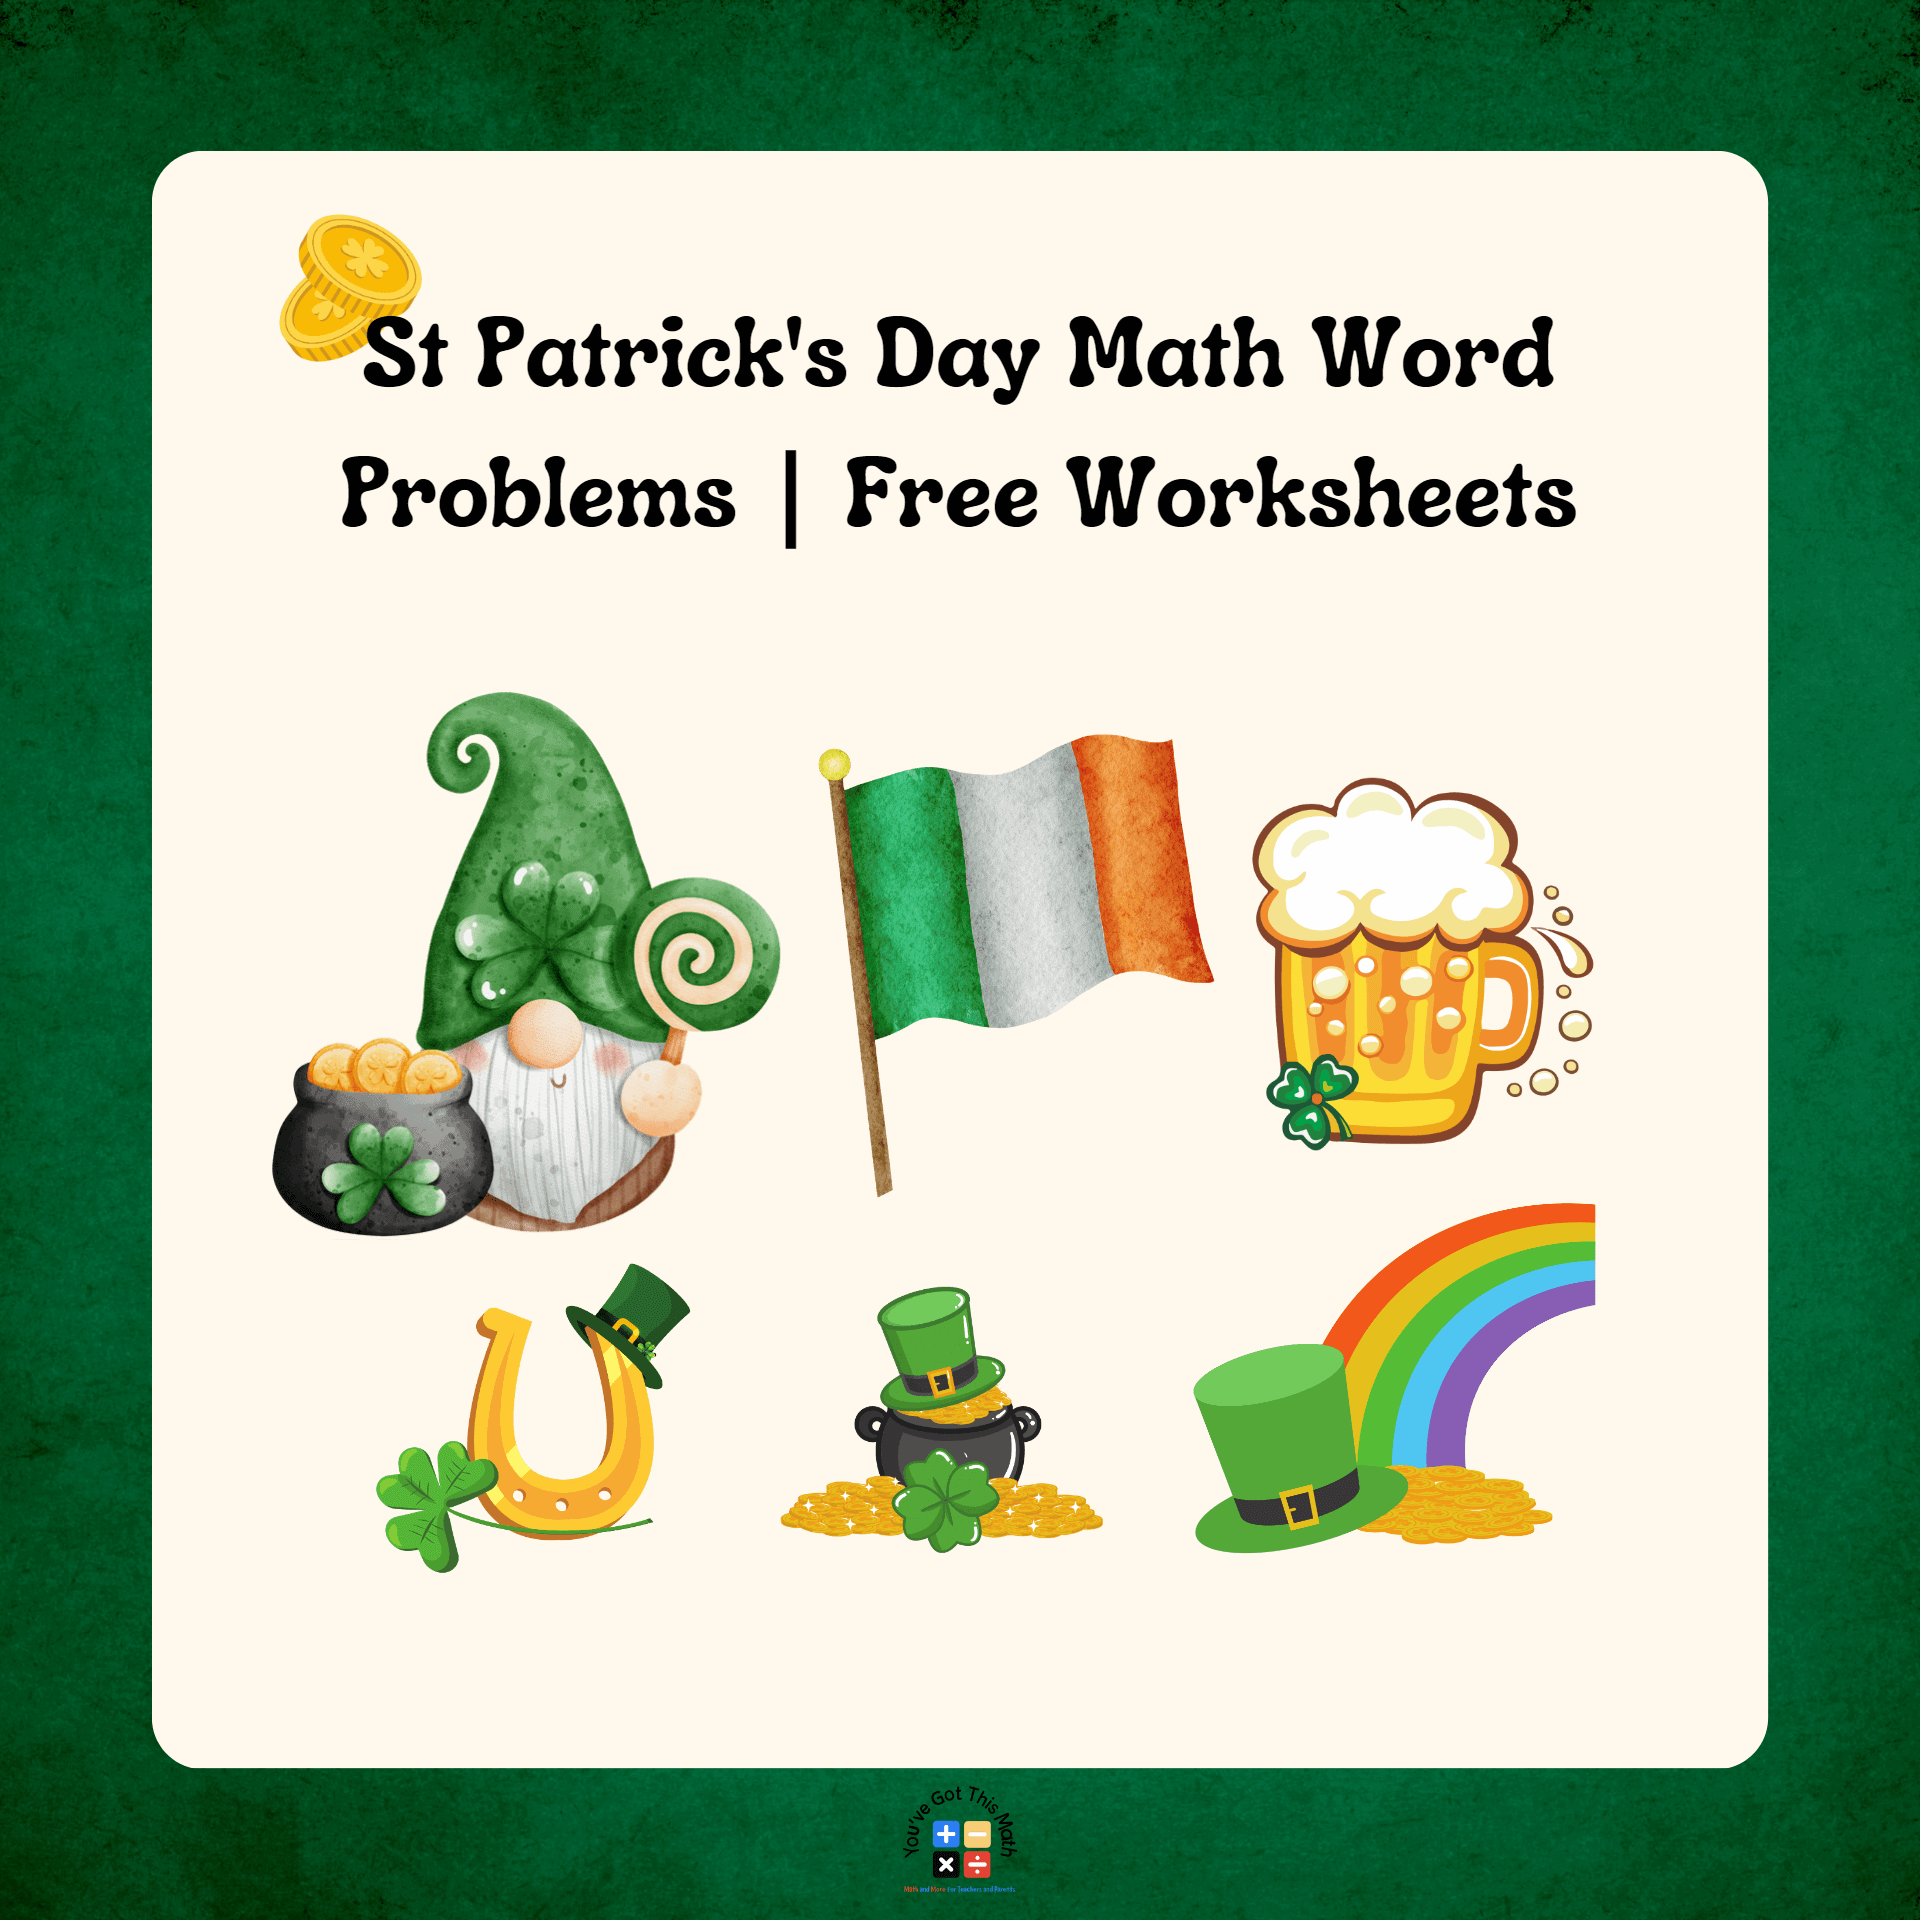 St. Patrick’s Day Math Word Problems | Free Worksheets